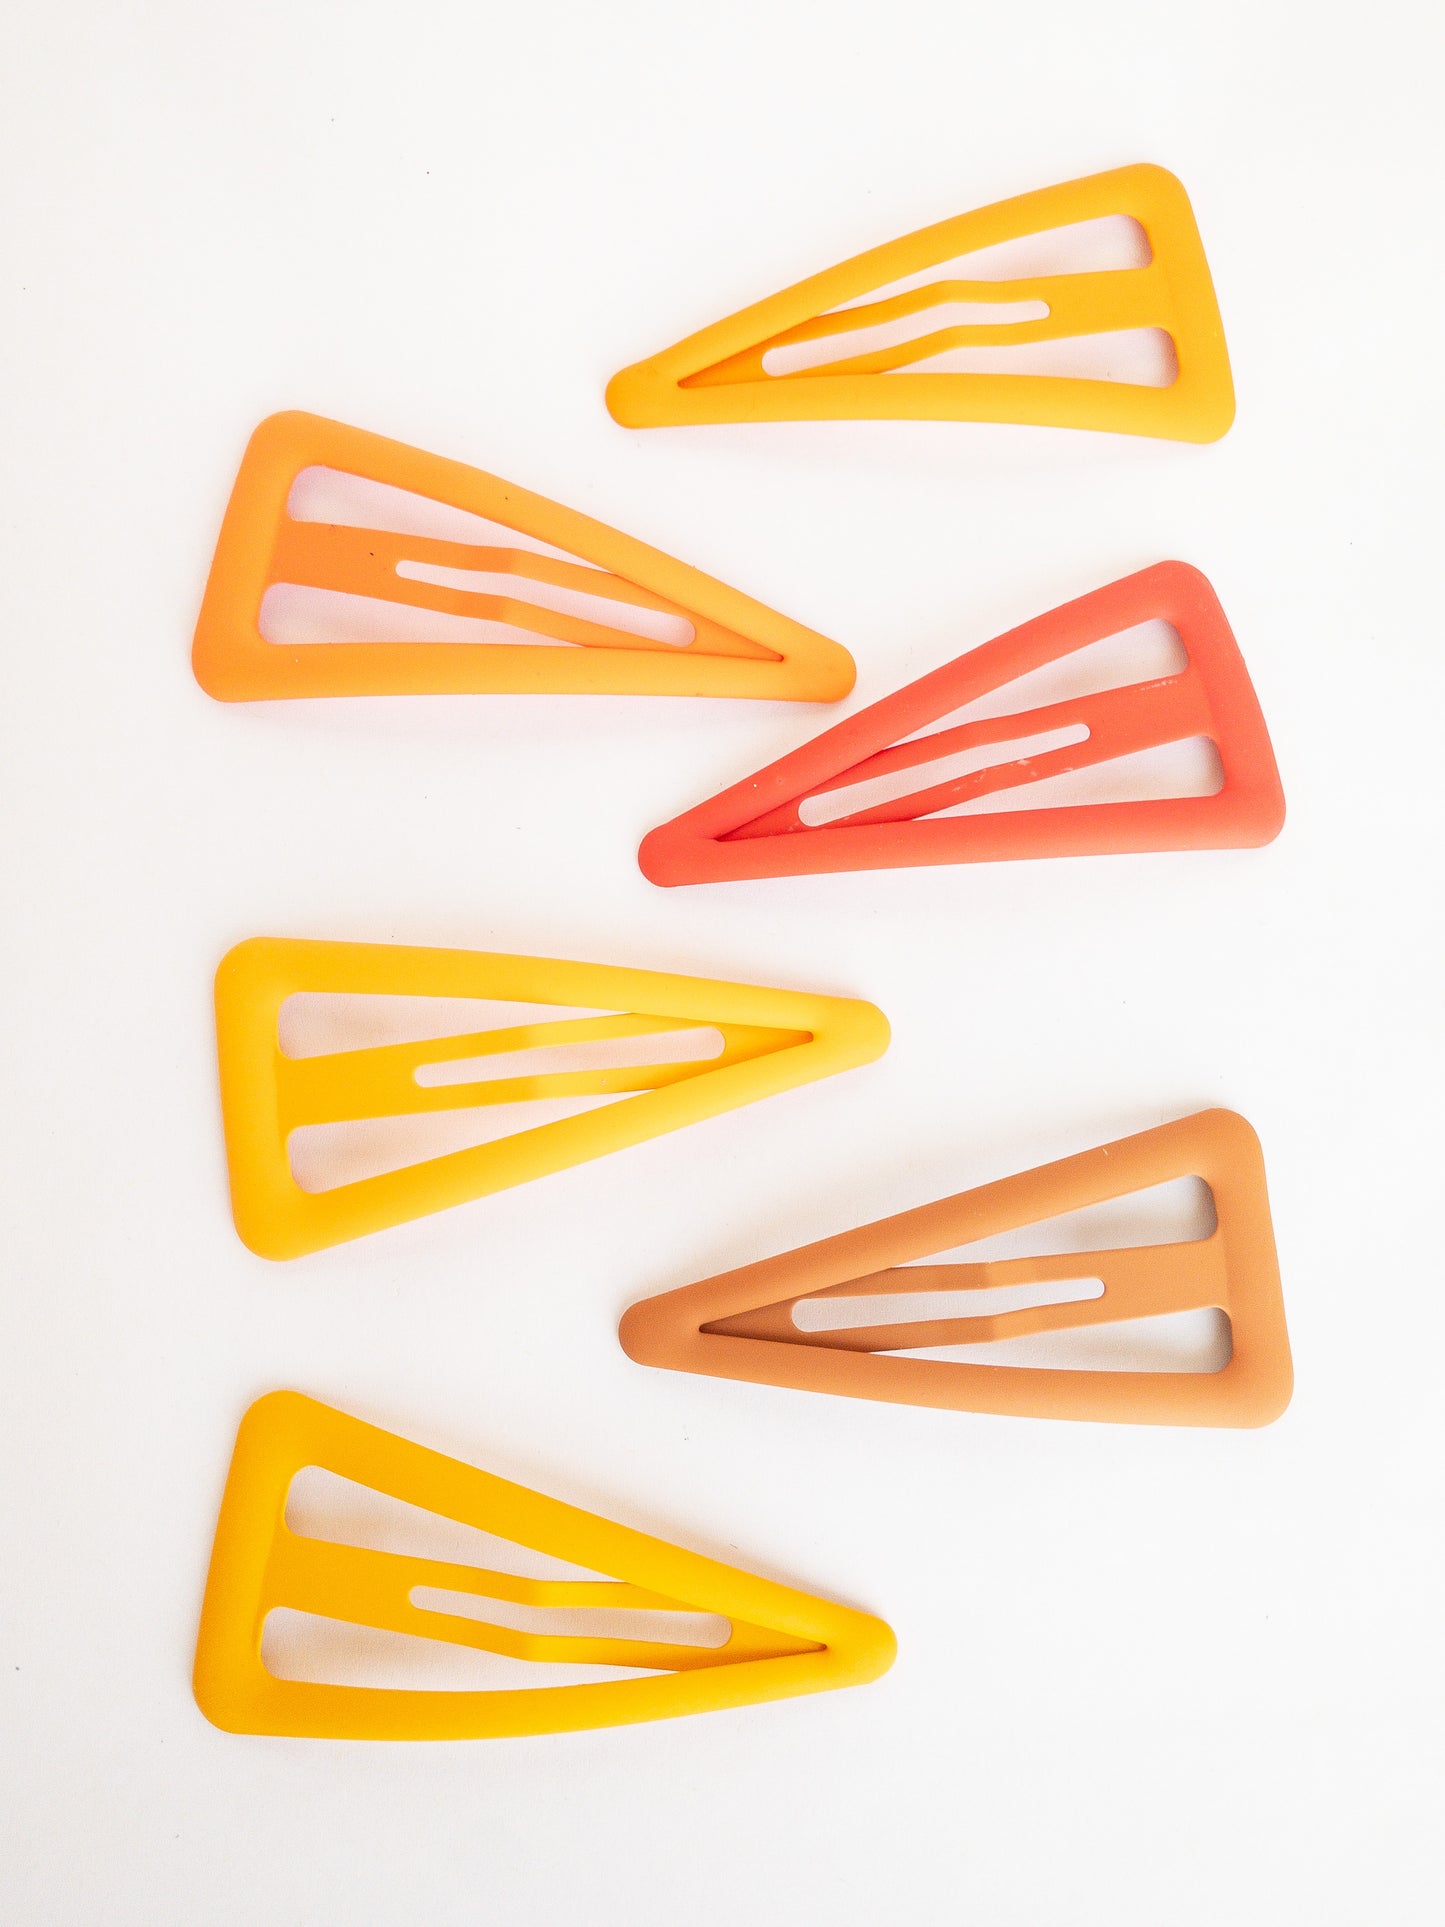 These large triangle snap clips are a fan favorite! With an ombre color palette fading from darker to lighter shades, you can mix them up and wear them together or choose your favorite of the day. Larger than your usual snap clip, these are sure to make a statement and hold your hair firm.